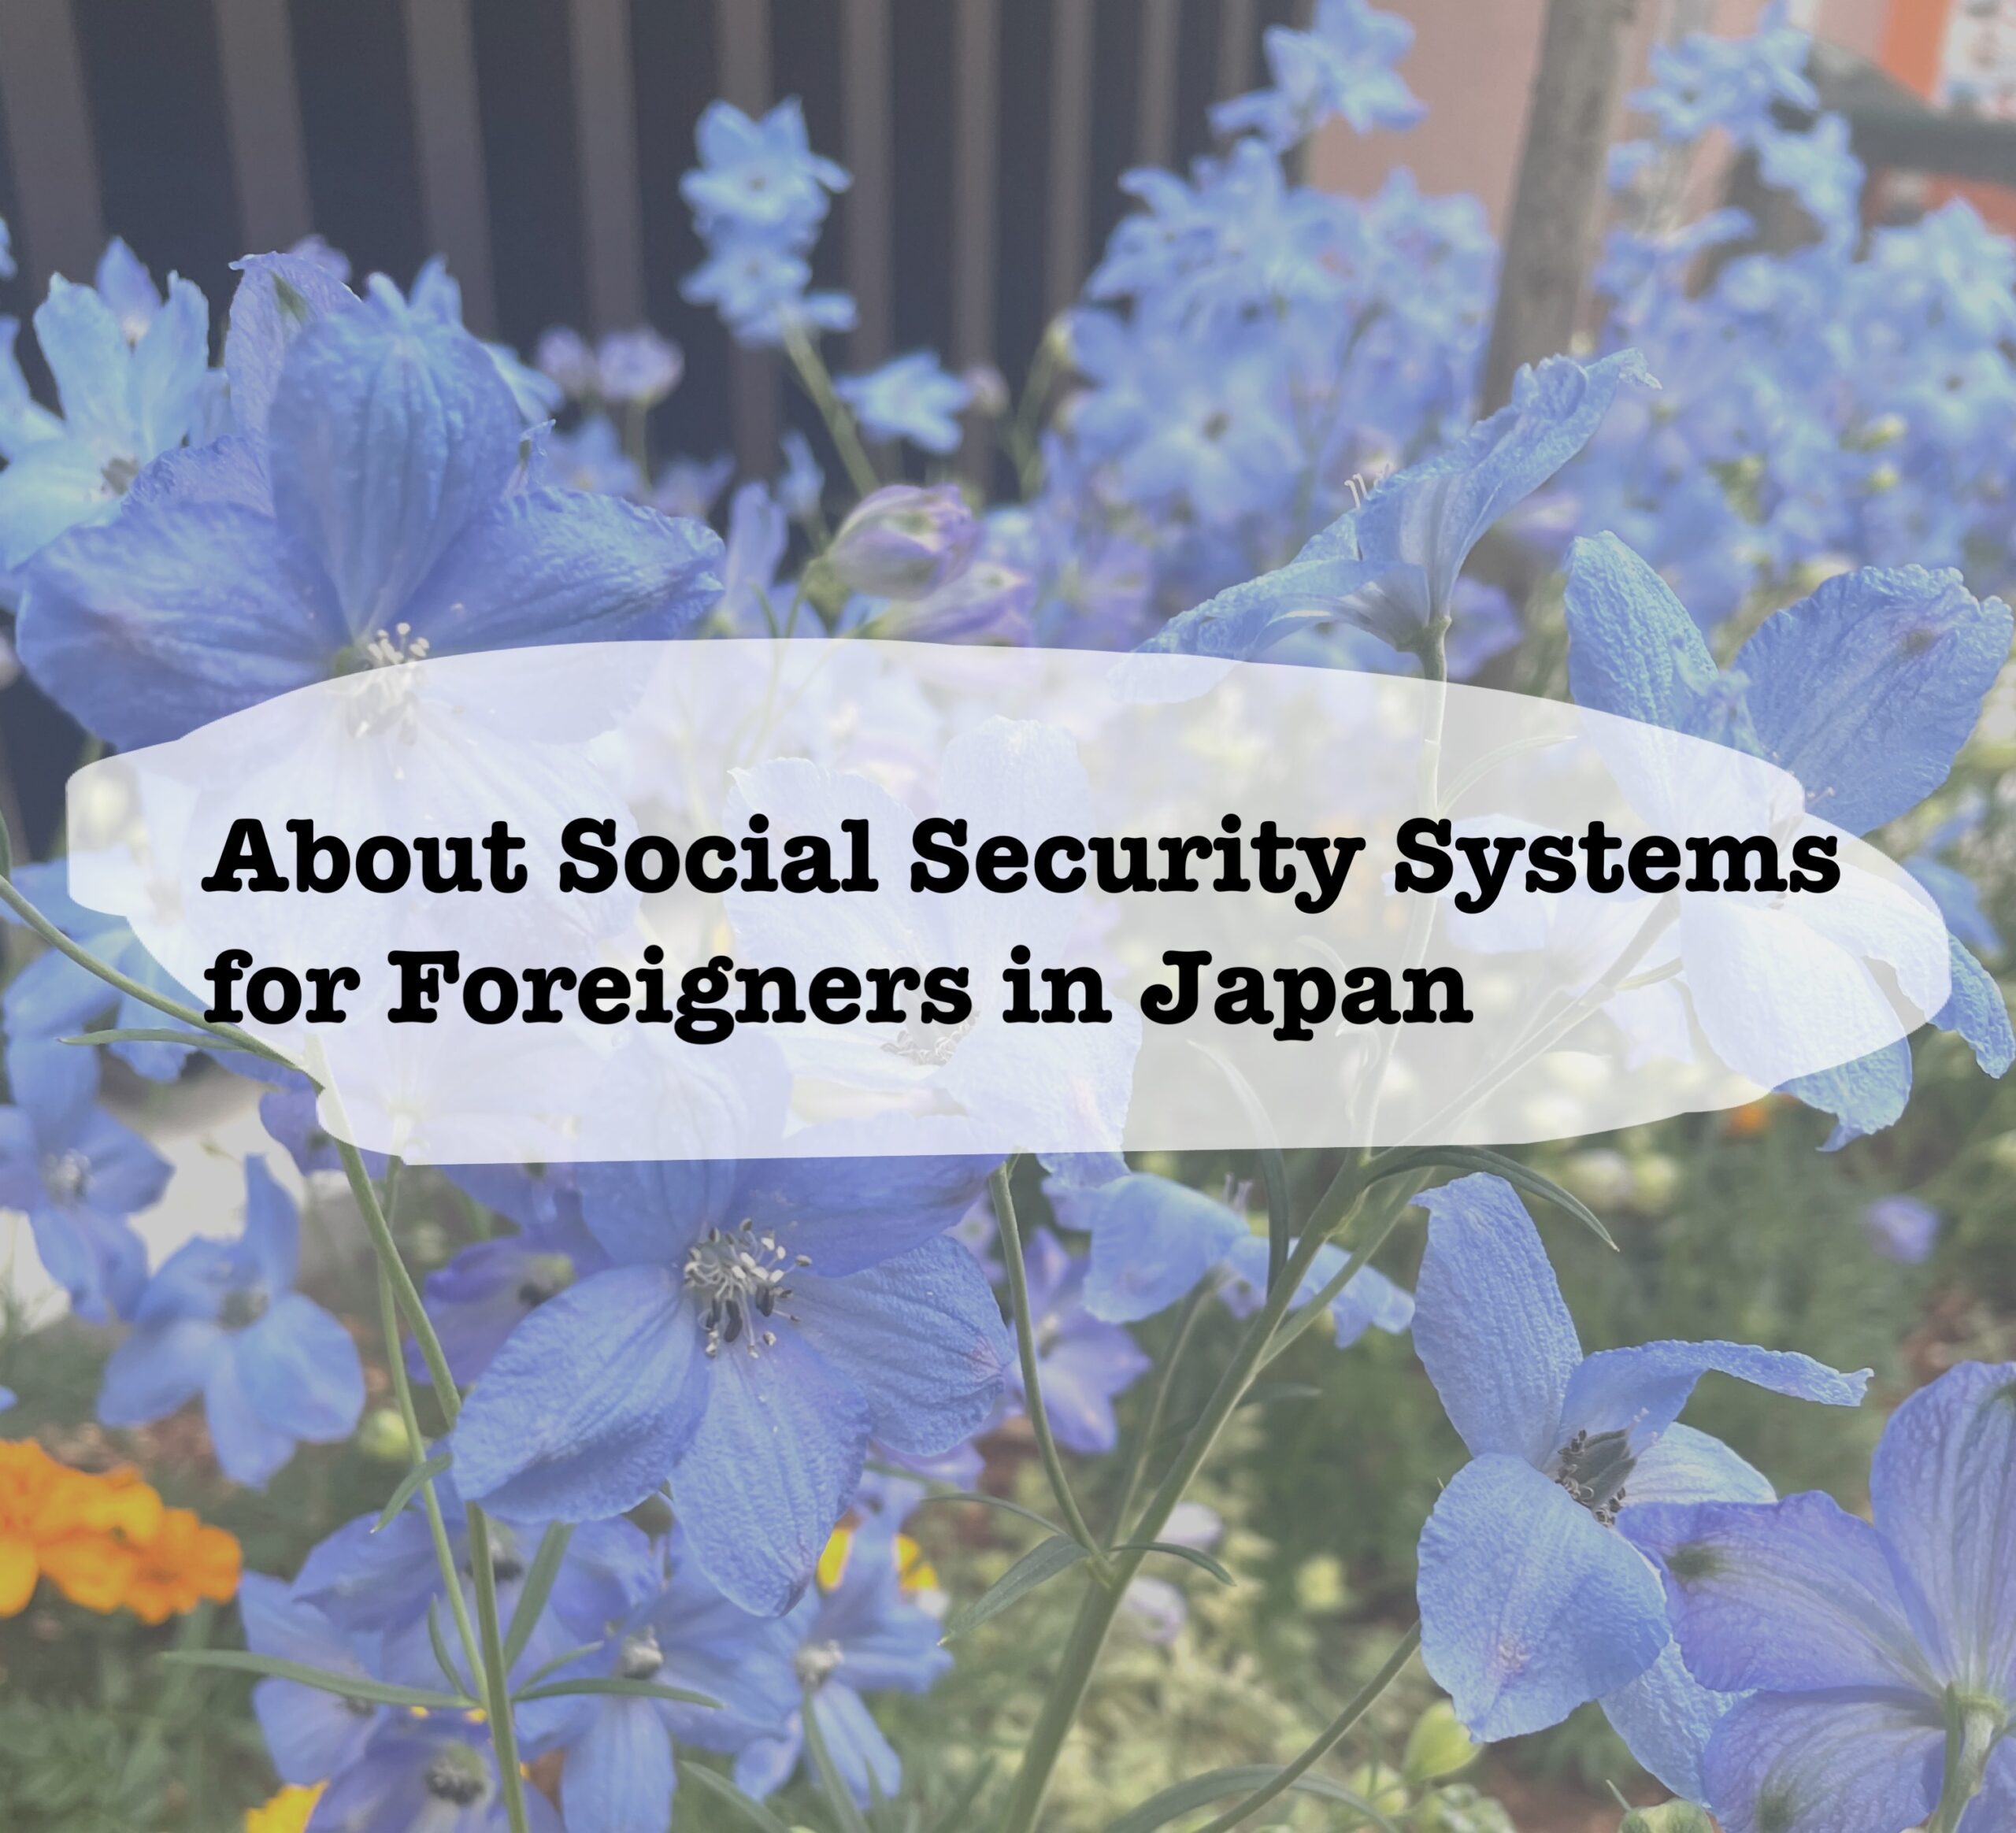 Comparison of Social Security Systems Self-Employed and Employee